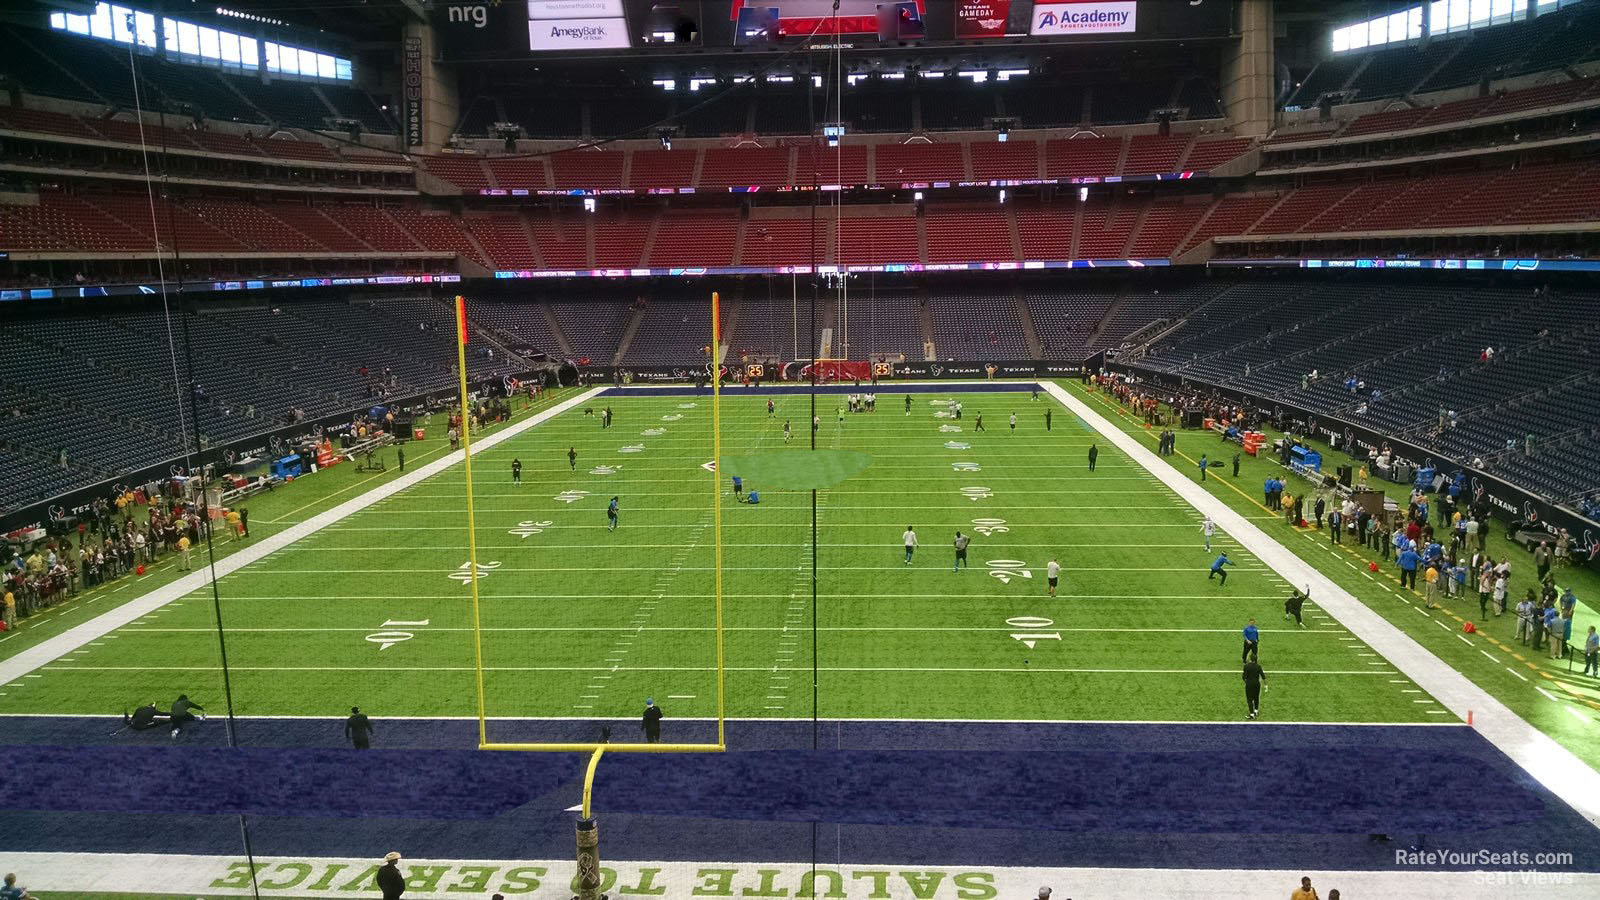 section 351, row a seat view  for football - nrg stadium